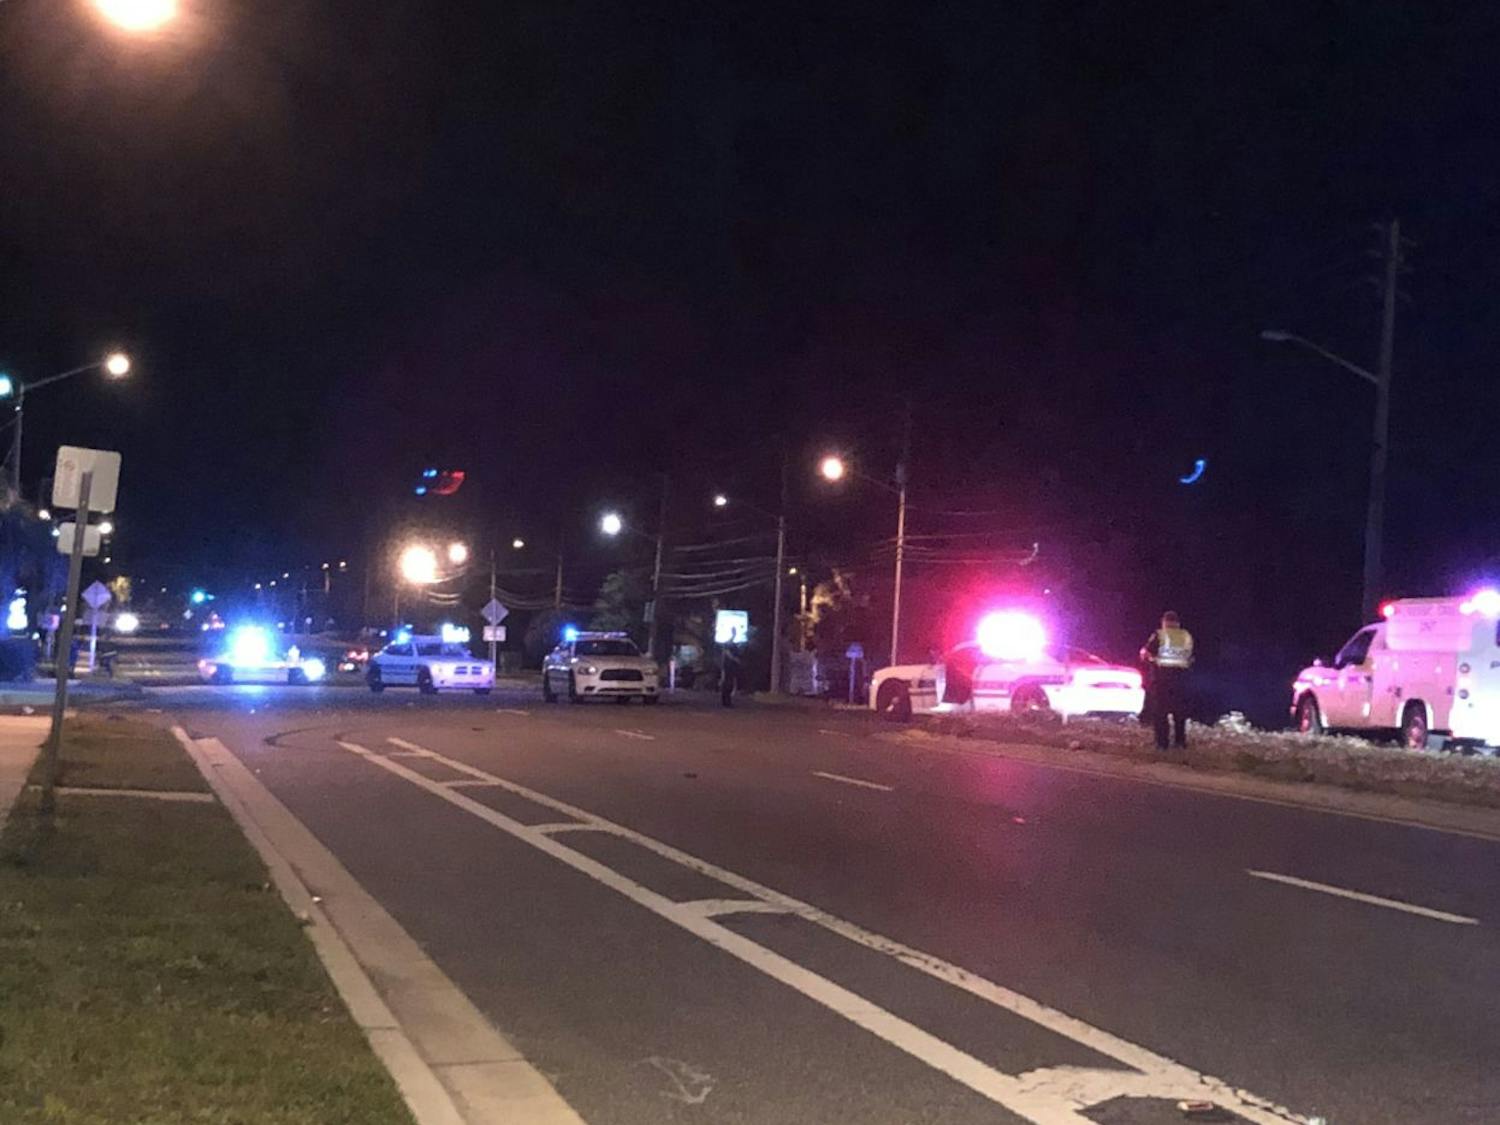 A woman died at UF Health Shands after she was hit by a car while crossing Southwest 13th Street, according to Gainesville Police.&nbsp;
&nbsp;